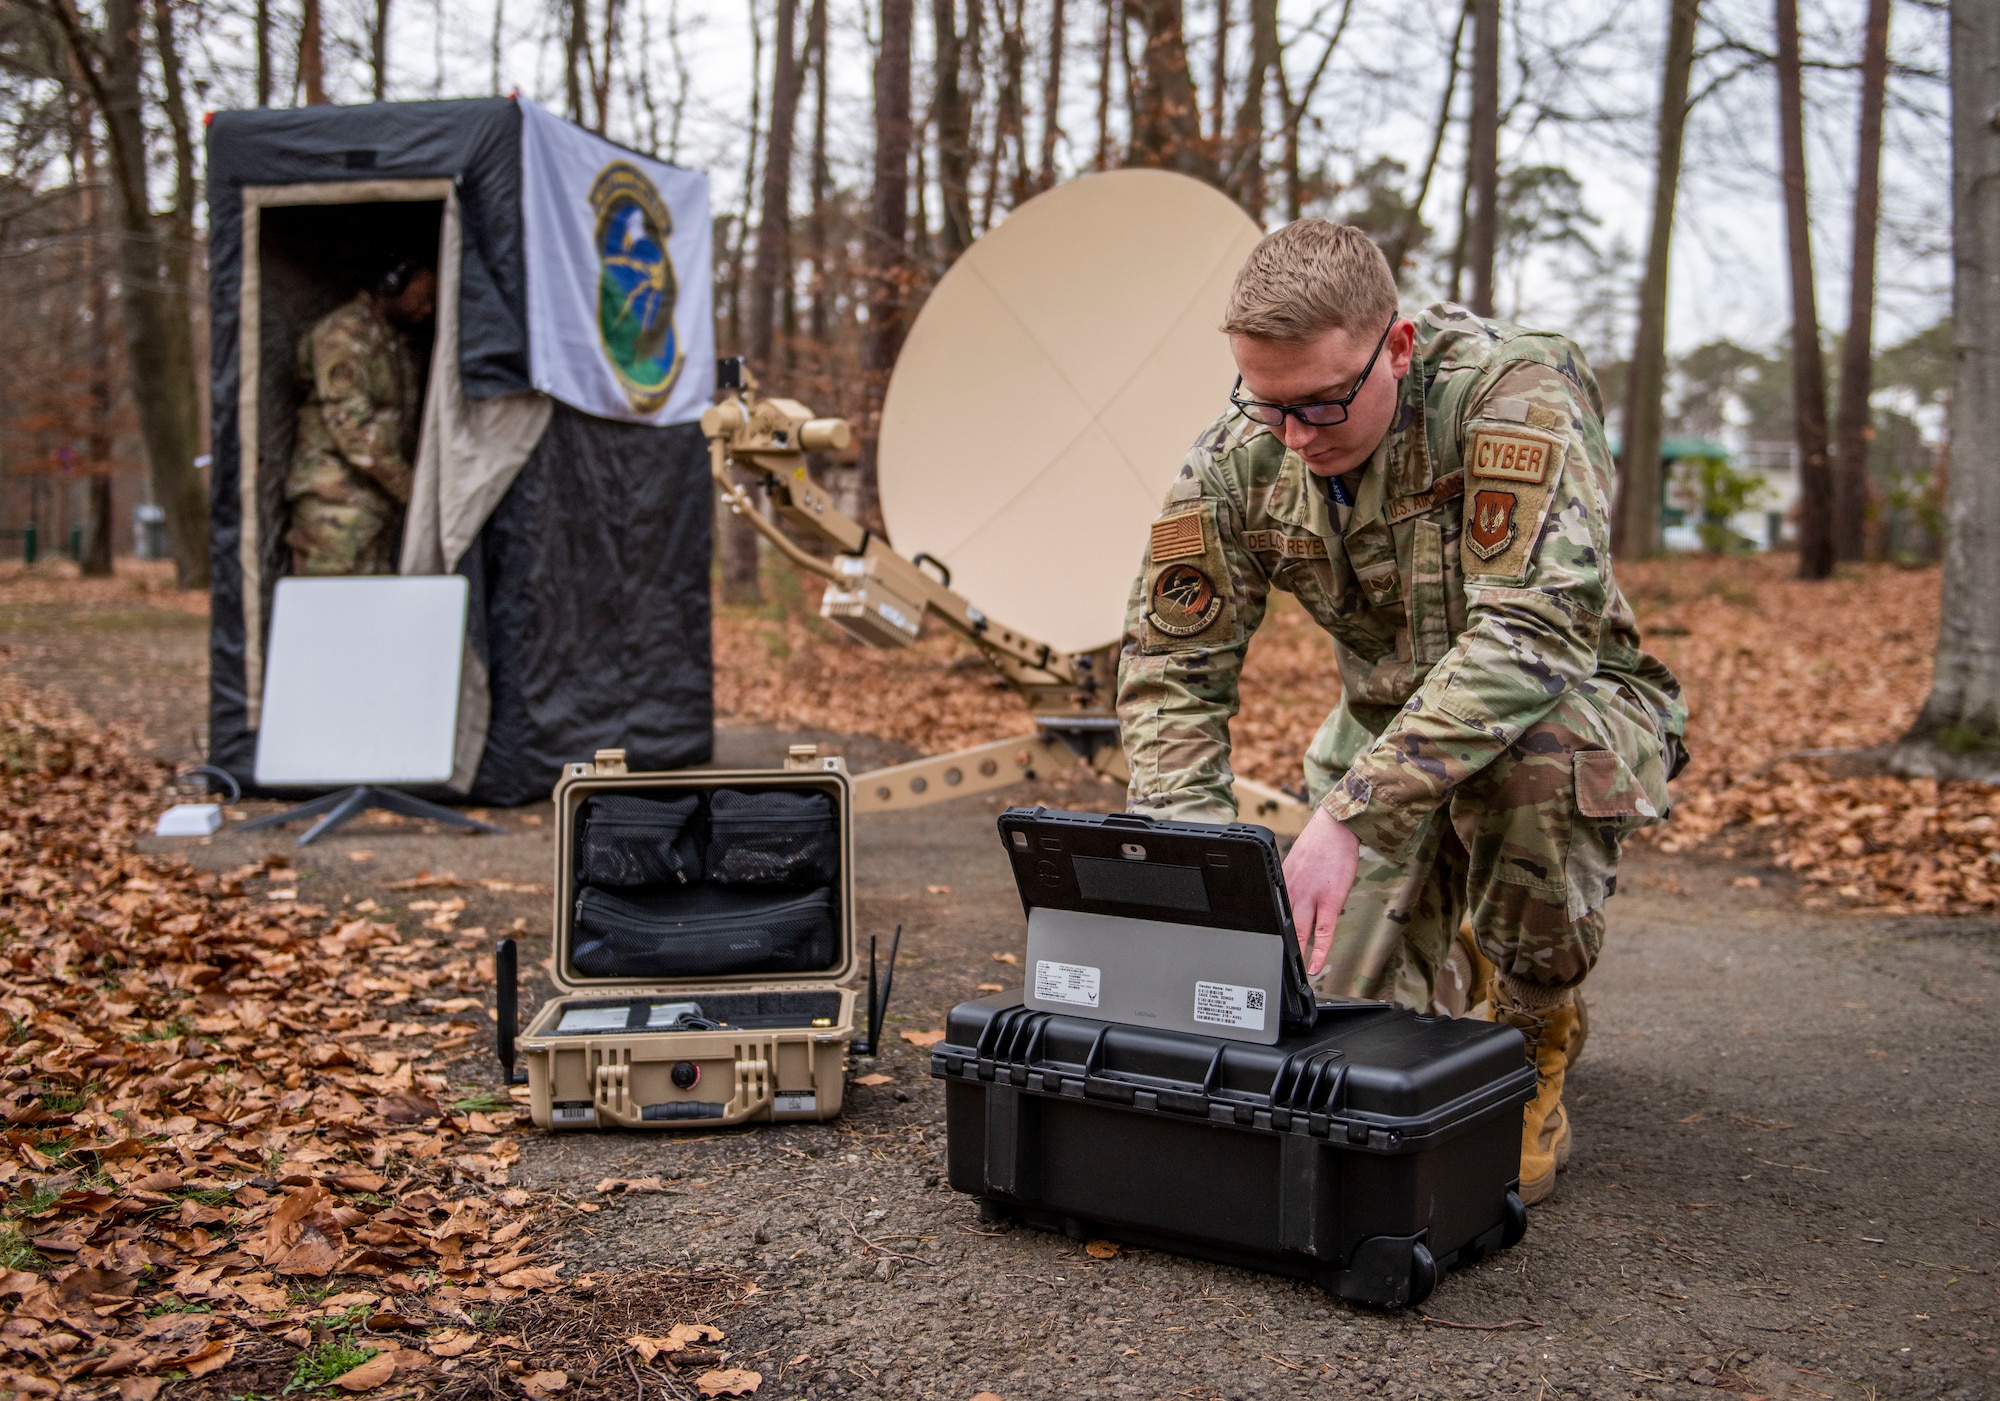 U.S. Air Force Senior Airman Nathaniel De Los Reyes, 1st Air and Space Communications Squadron intel server operations technician, demonstrates the setup of BlackNet equipment at Ramstein Air Base, Germany, Jan. 20, 2023.